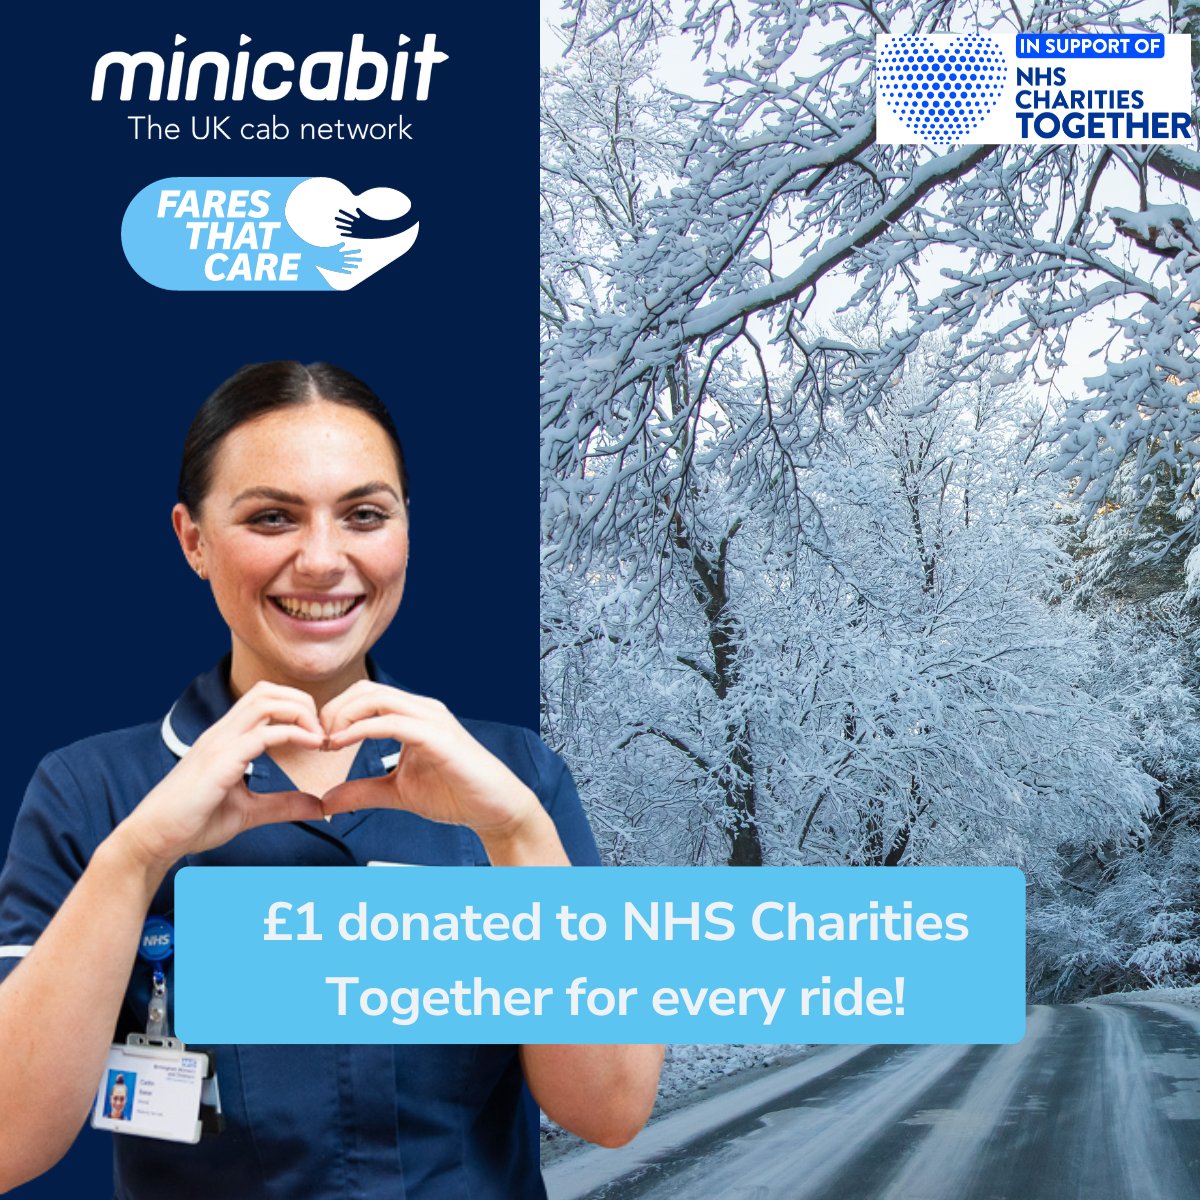 Fares That Care is back! Make your journey matter. minicabit will donate £1 to NHS Charities Together for each cab journey you book now that’s completed by 28th Jan 2024. Book your trip today -> minicabit.com #NHSTogetherUK #FaresThatCare #minicabit